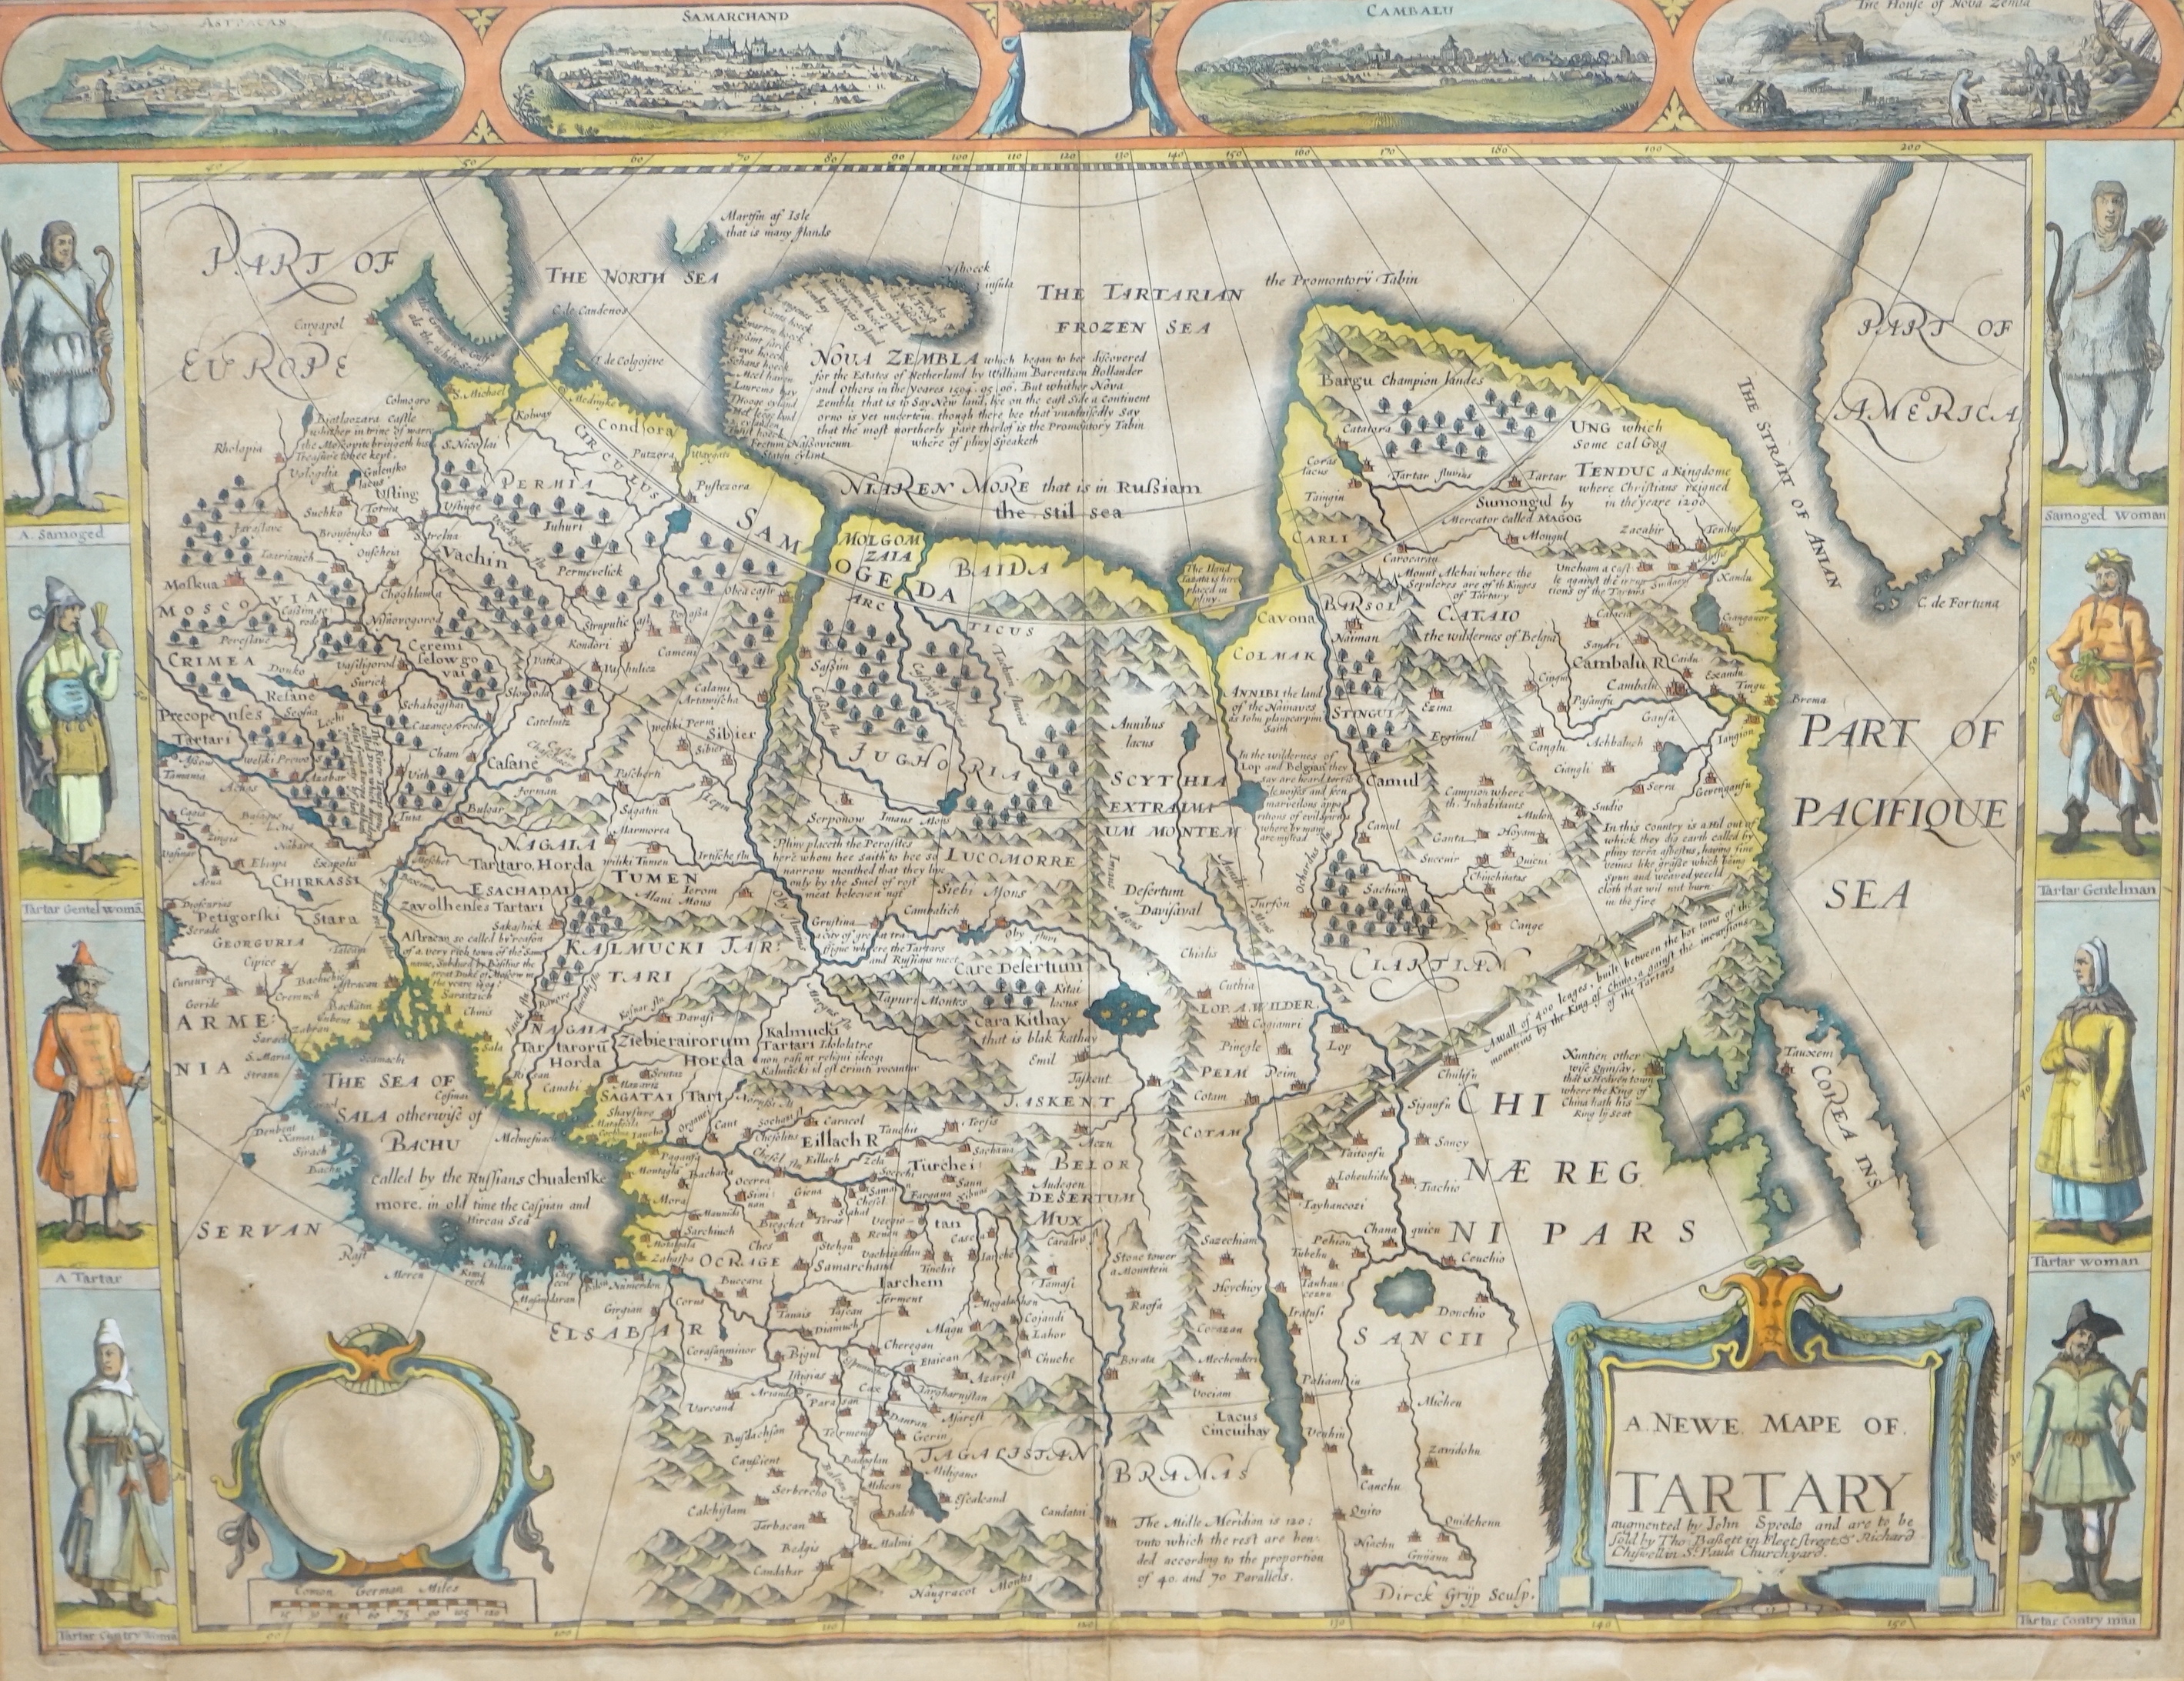 John Speed (1552-1629), hand coloured map, A Newe Mape of Tartary, sold by Thomas Bassett, Fleet Street and Richard Chiswell in the St Paul's Churchyard, 40 x 52cm                                                         